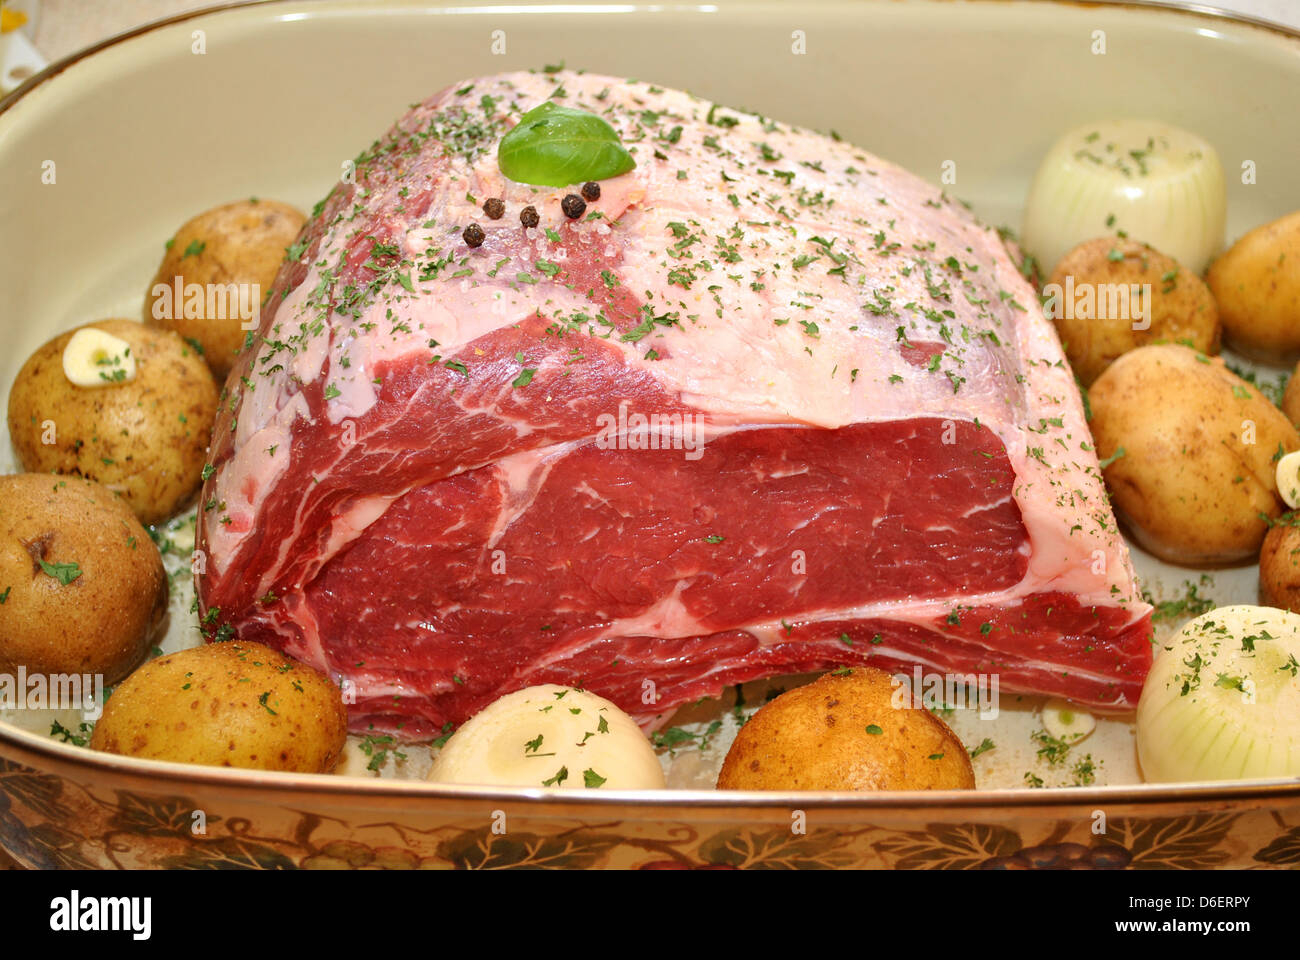 Prime Rib Roast Ready for the Oven Stock Photo